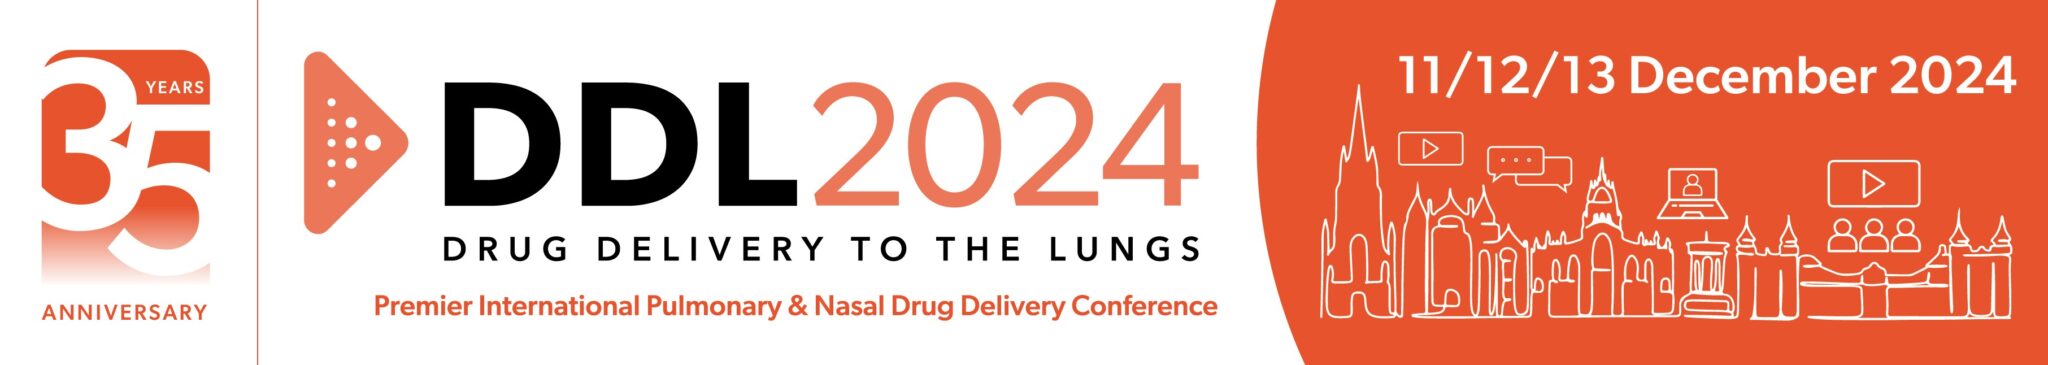 DDL Drug Delivery to the Lungs Conference